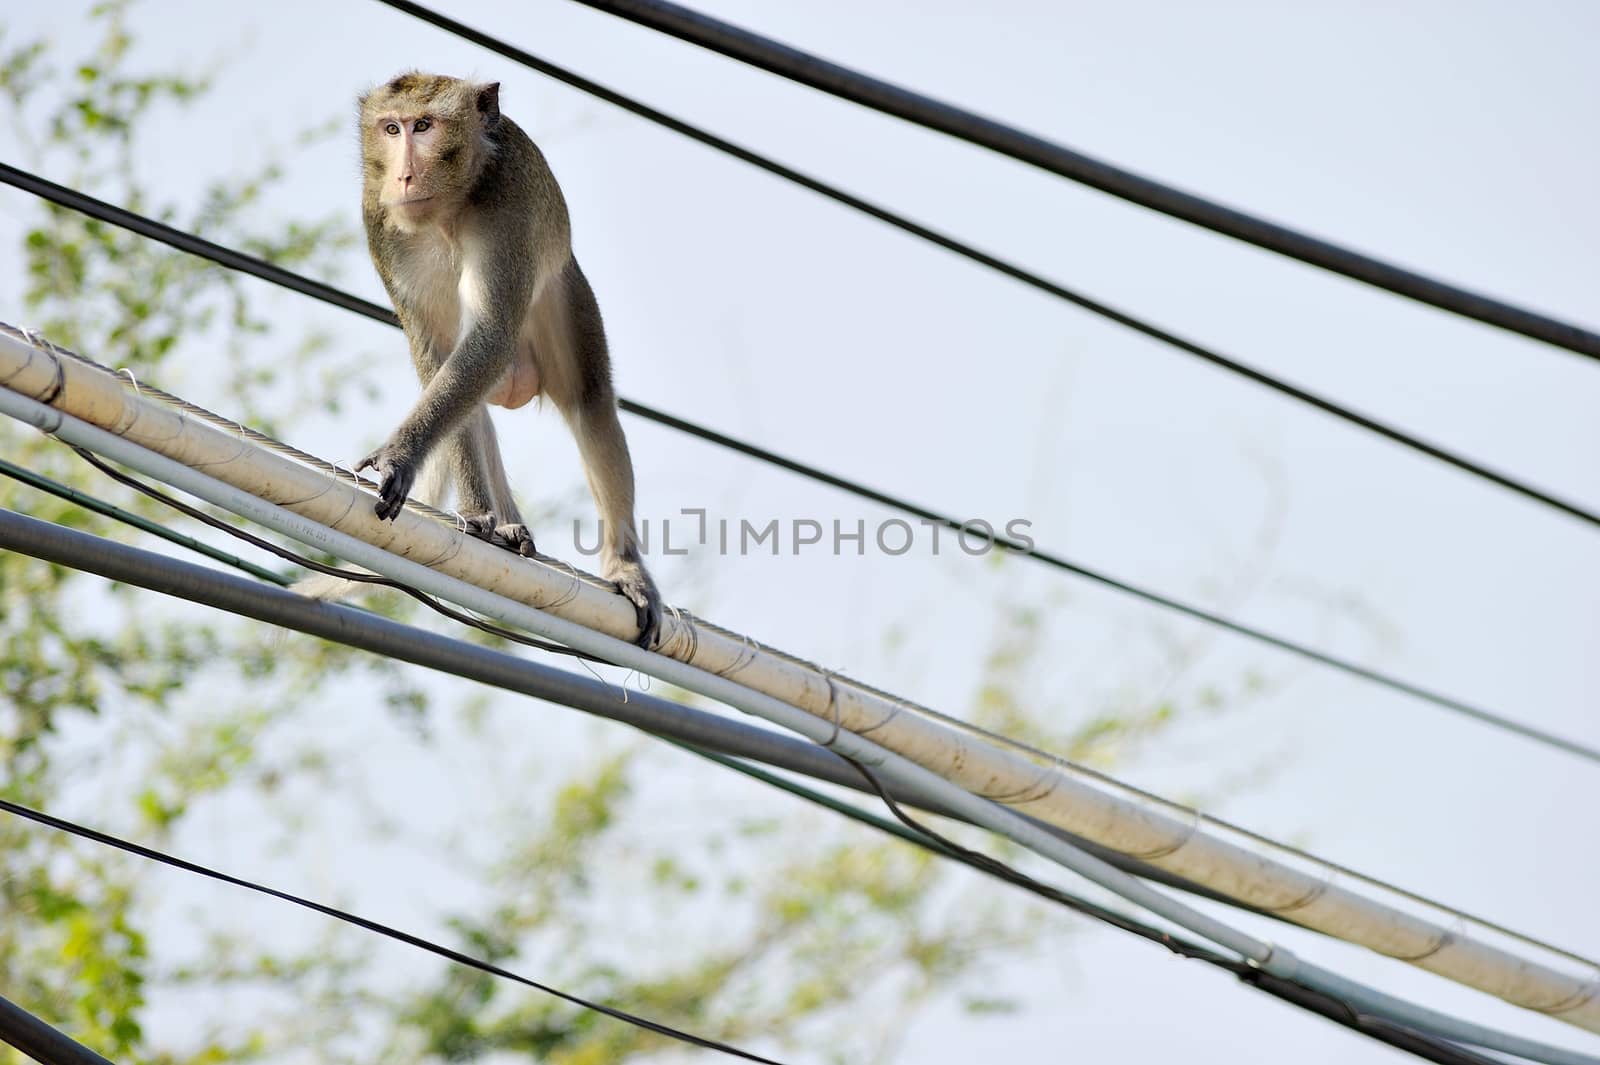 Monkey hanging on electric wires